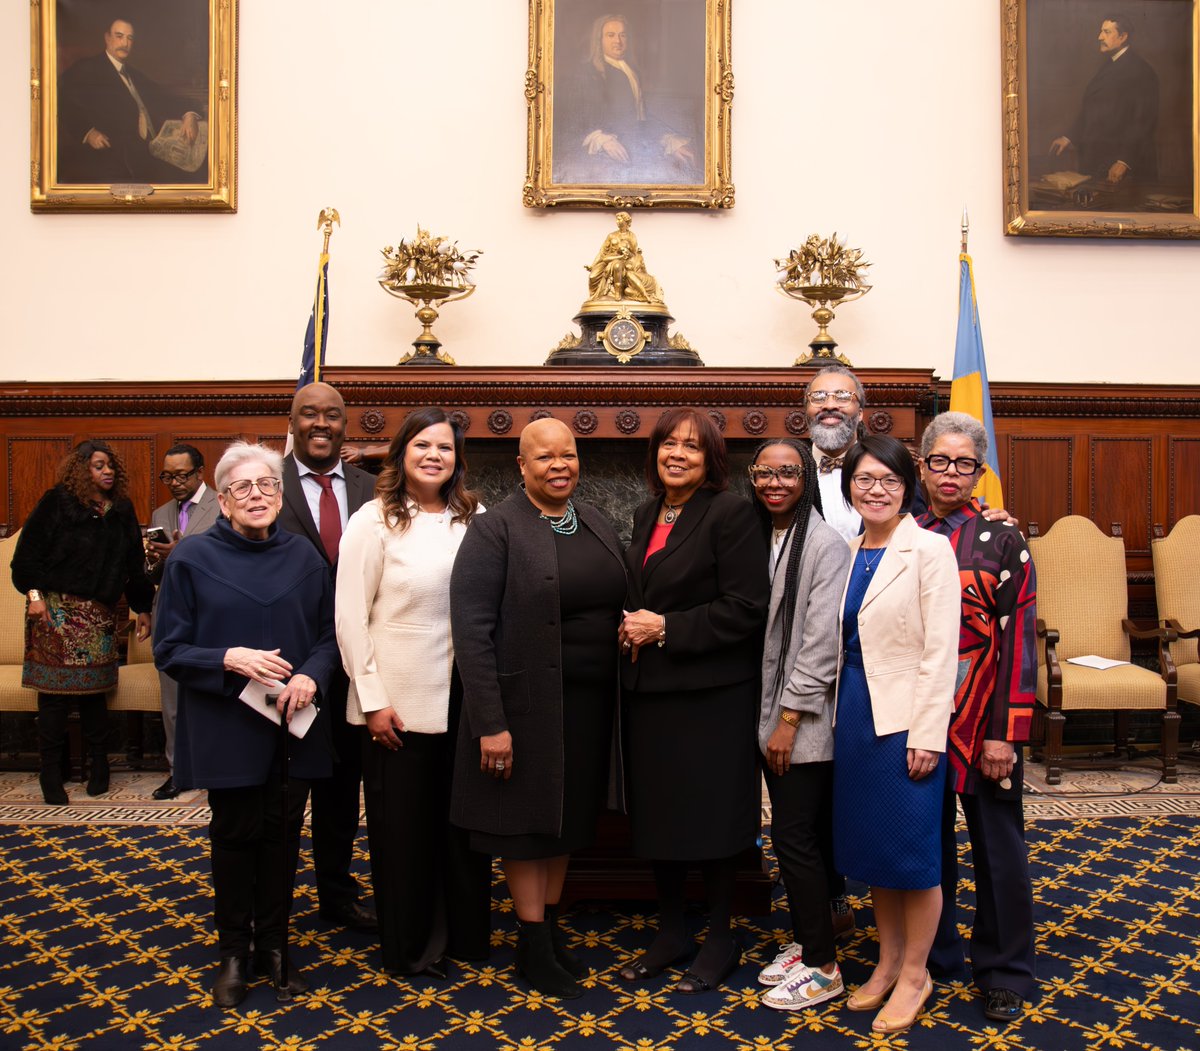 Today, I asked that Joyce Wilkerson continue her service as a member of the School District of Philadelphia Board of Education. Our children are our future, and members of the Board play crucial roles in ensuring our children are on the path to self-sufficiency.